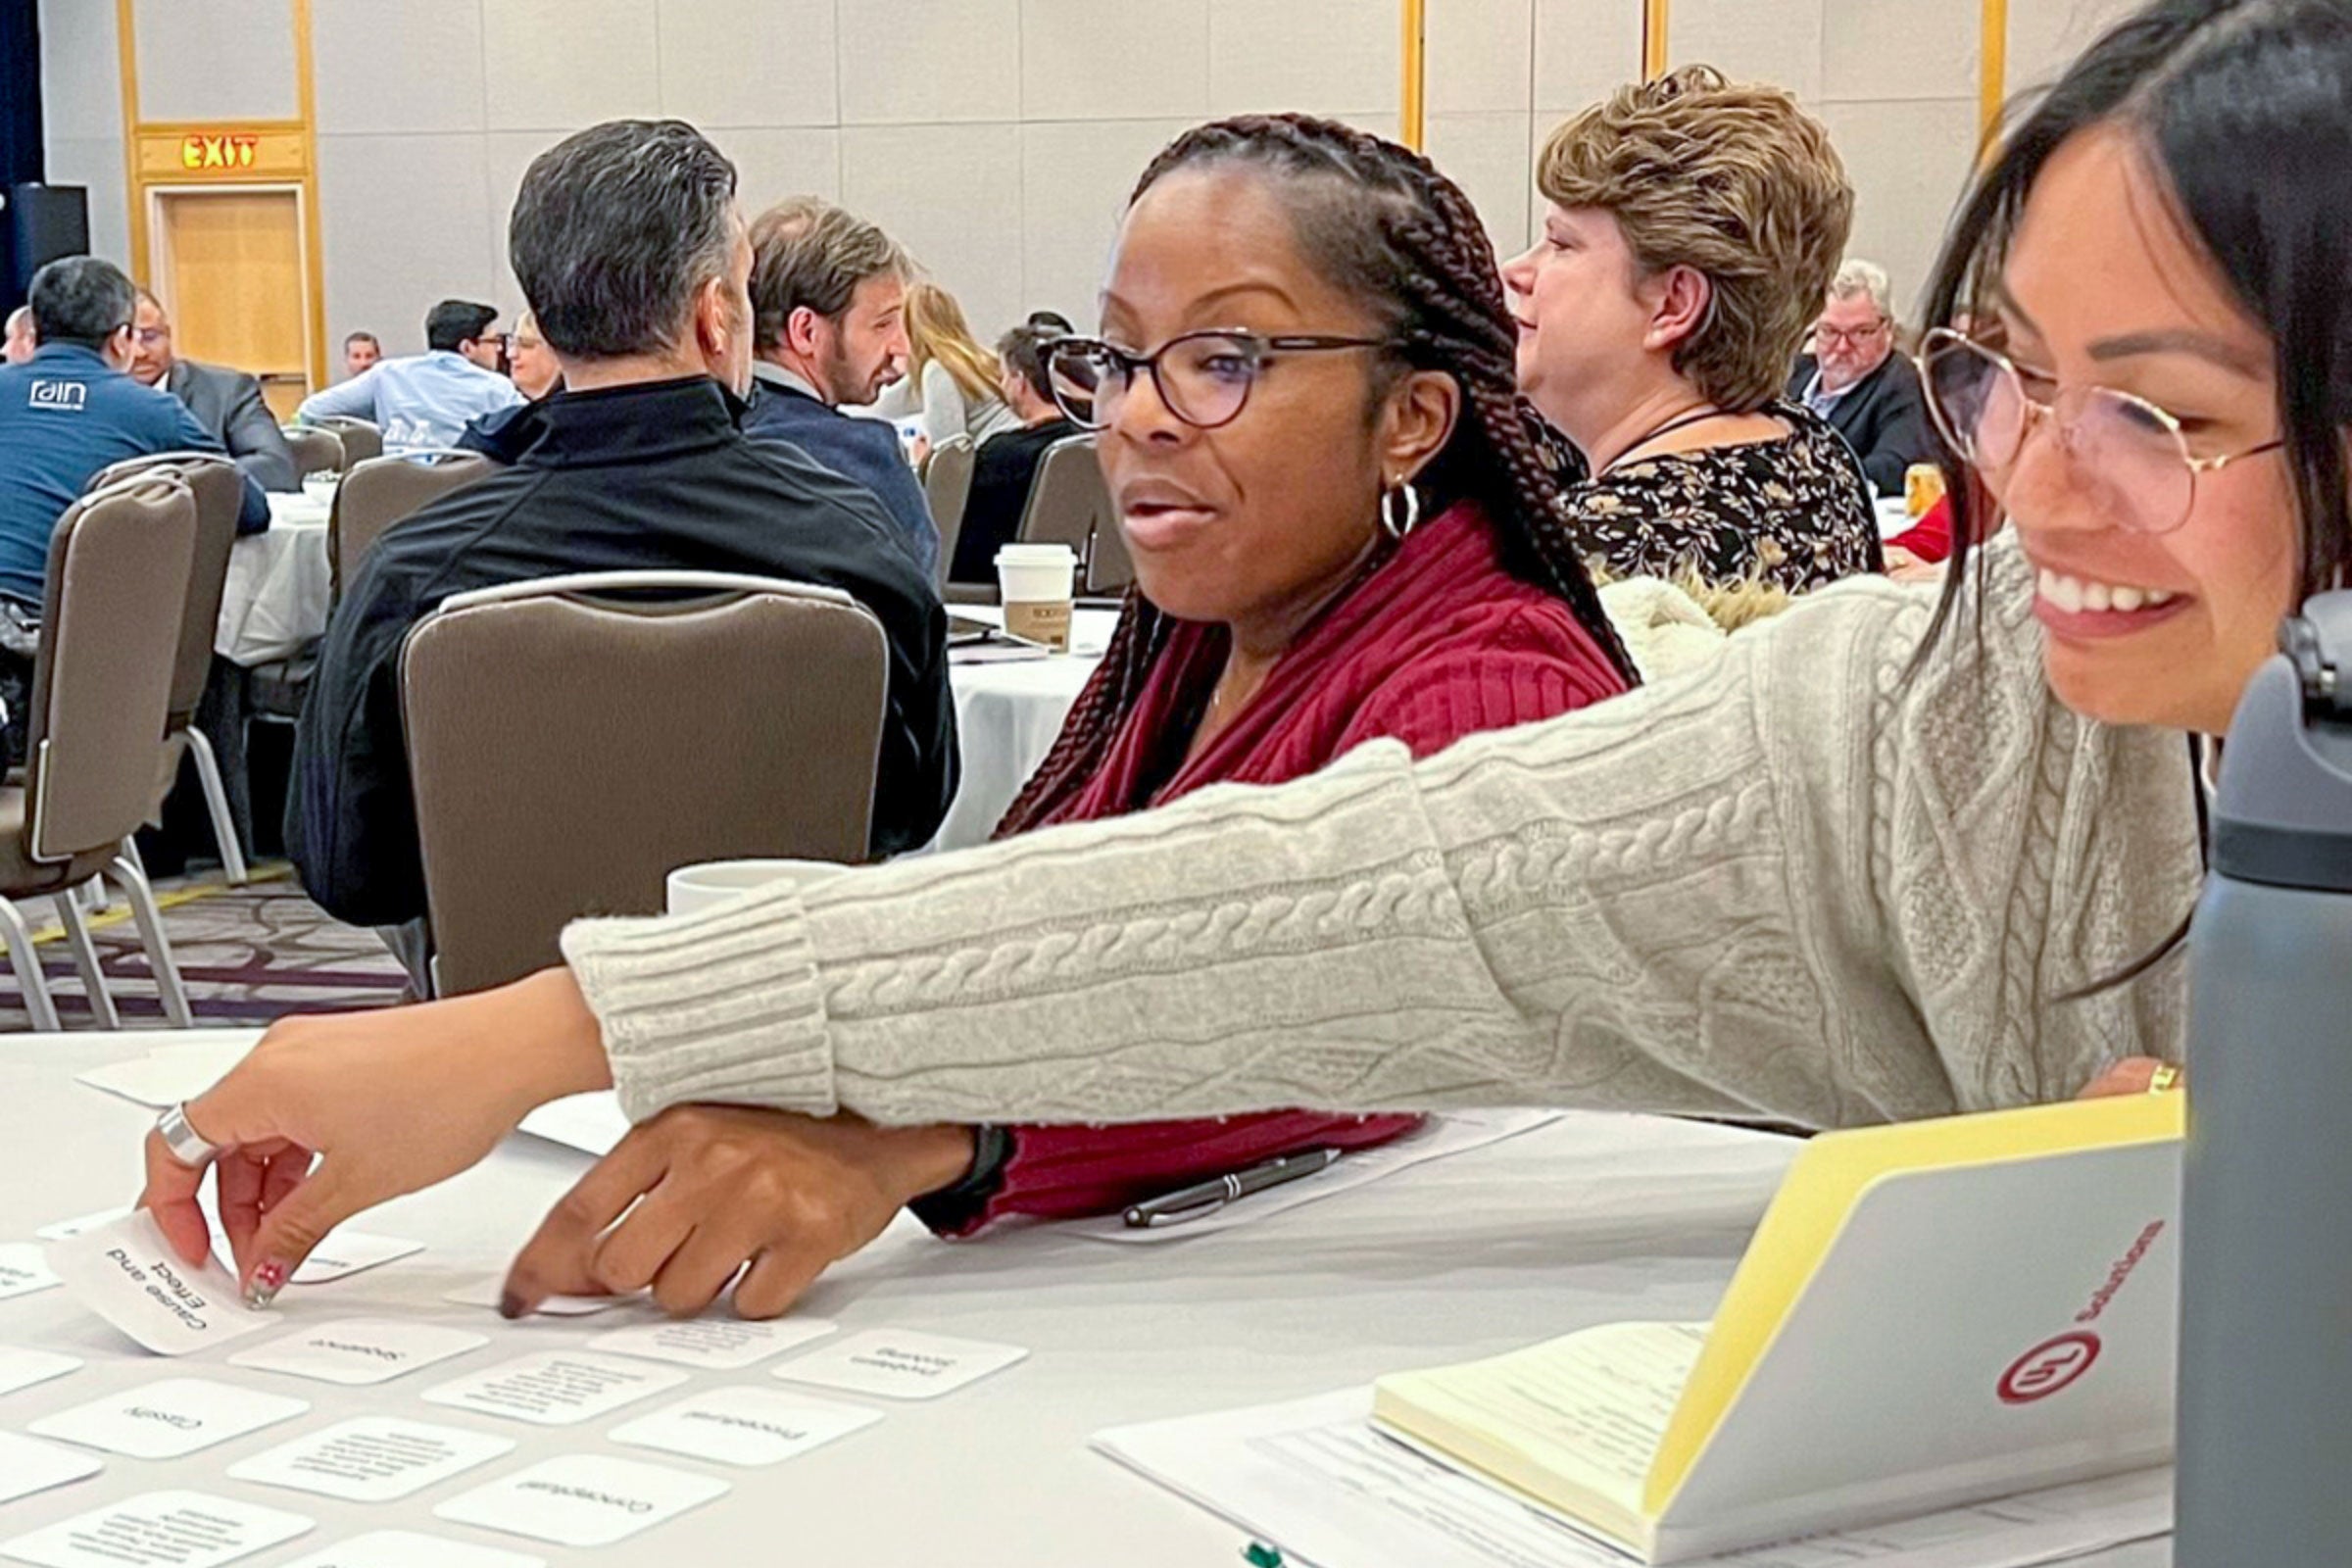 Conference attendees engage in a card game exercise during a presentation on instructional strategies.